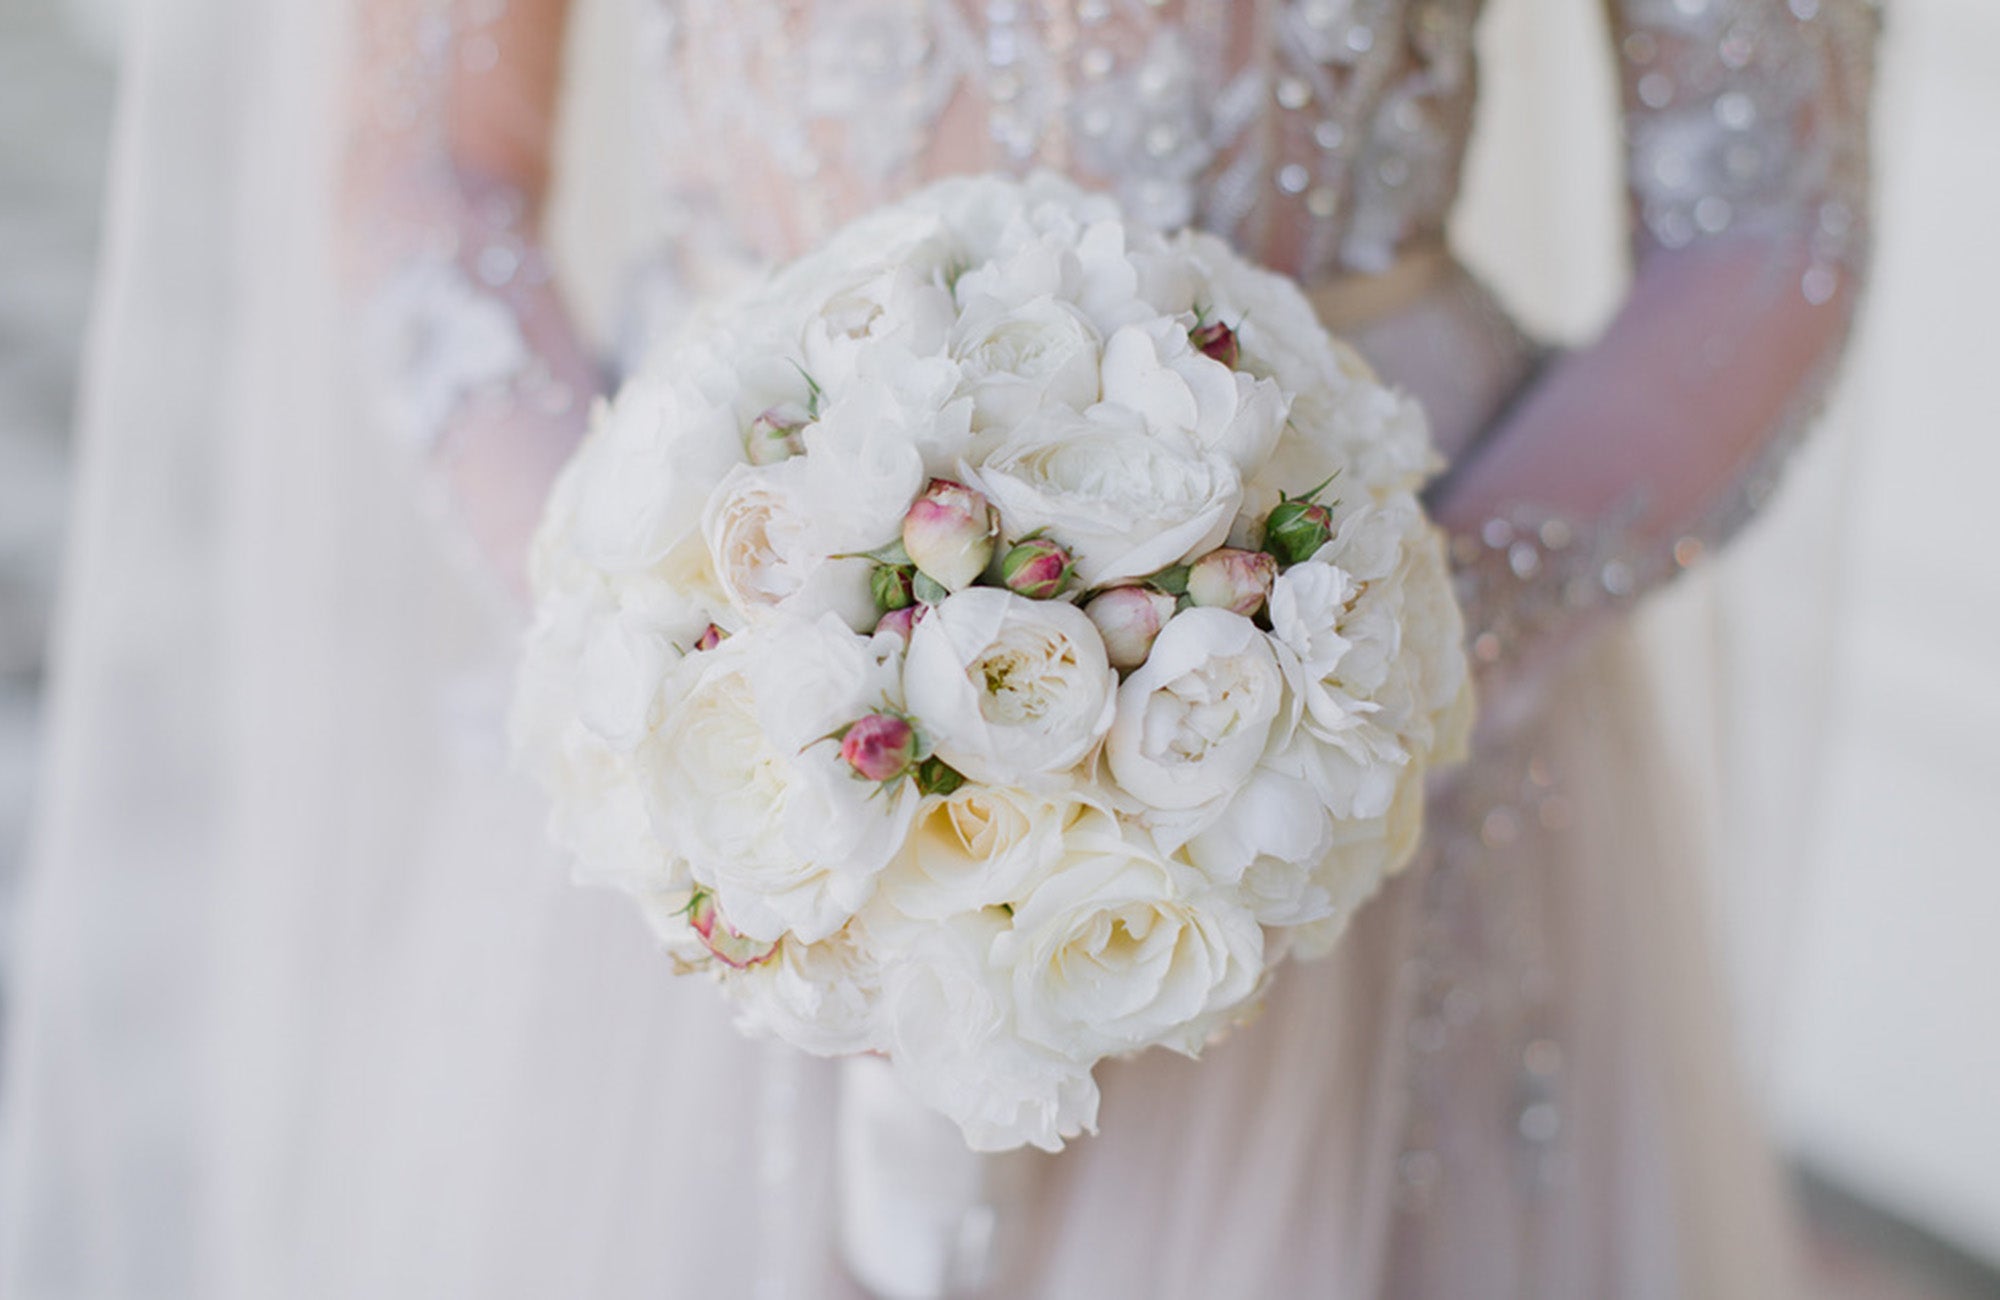 White bridal bouquet being held by bride